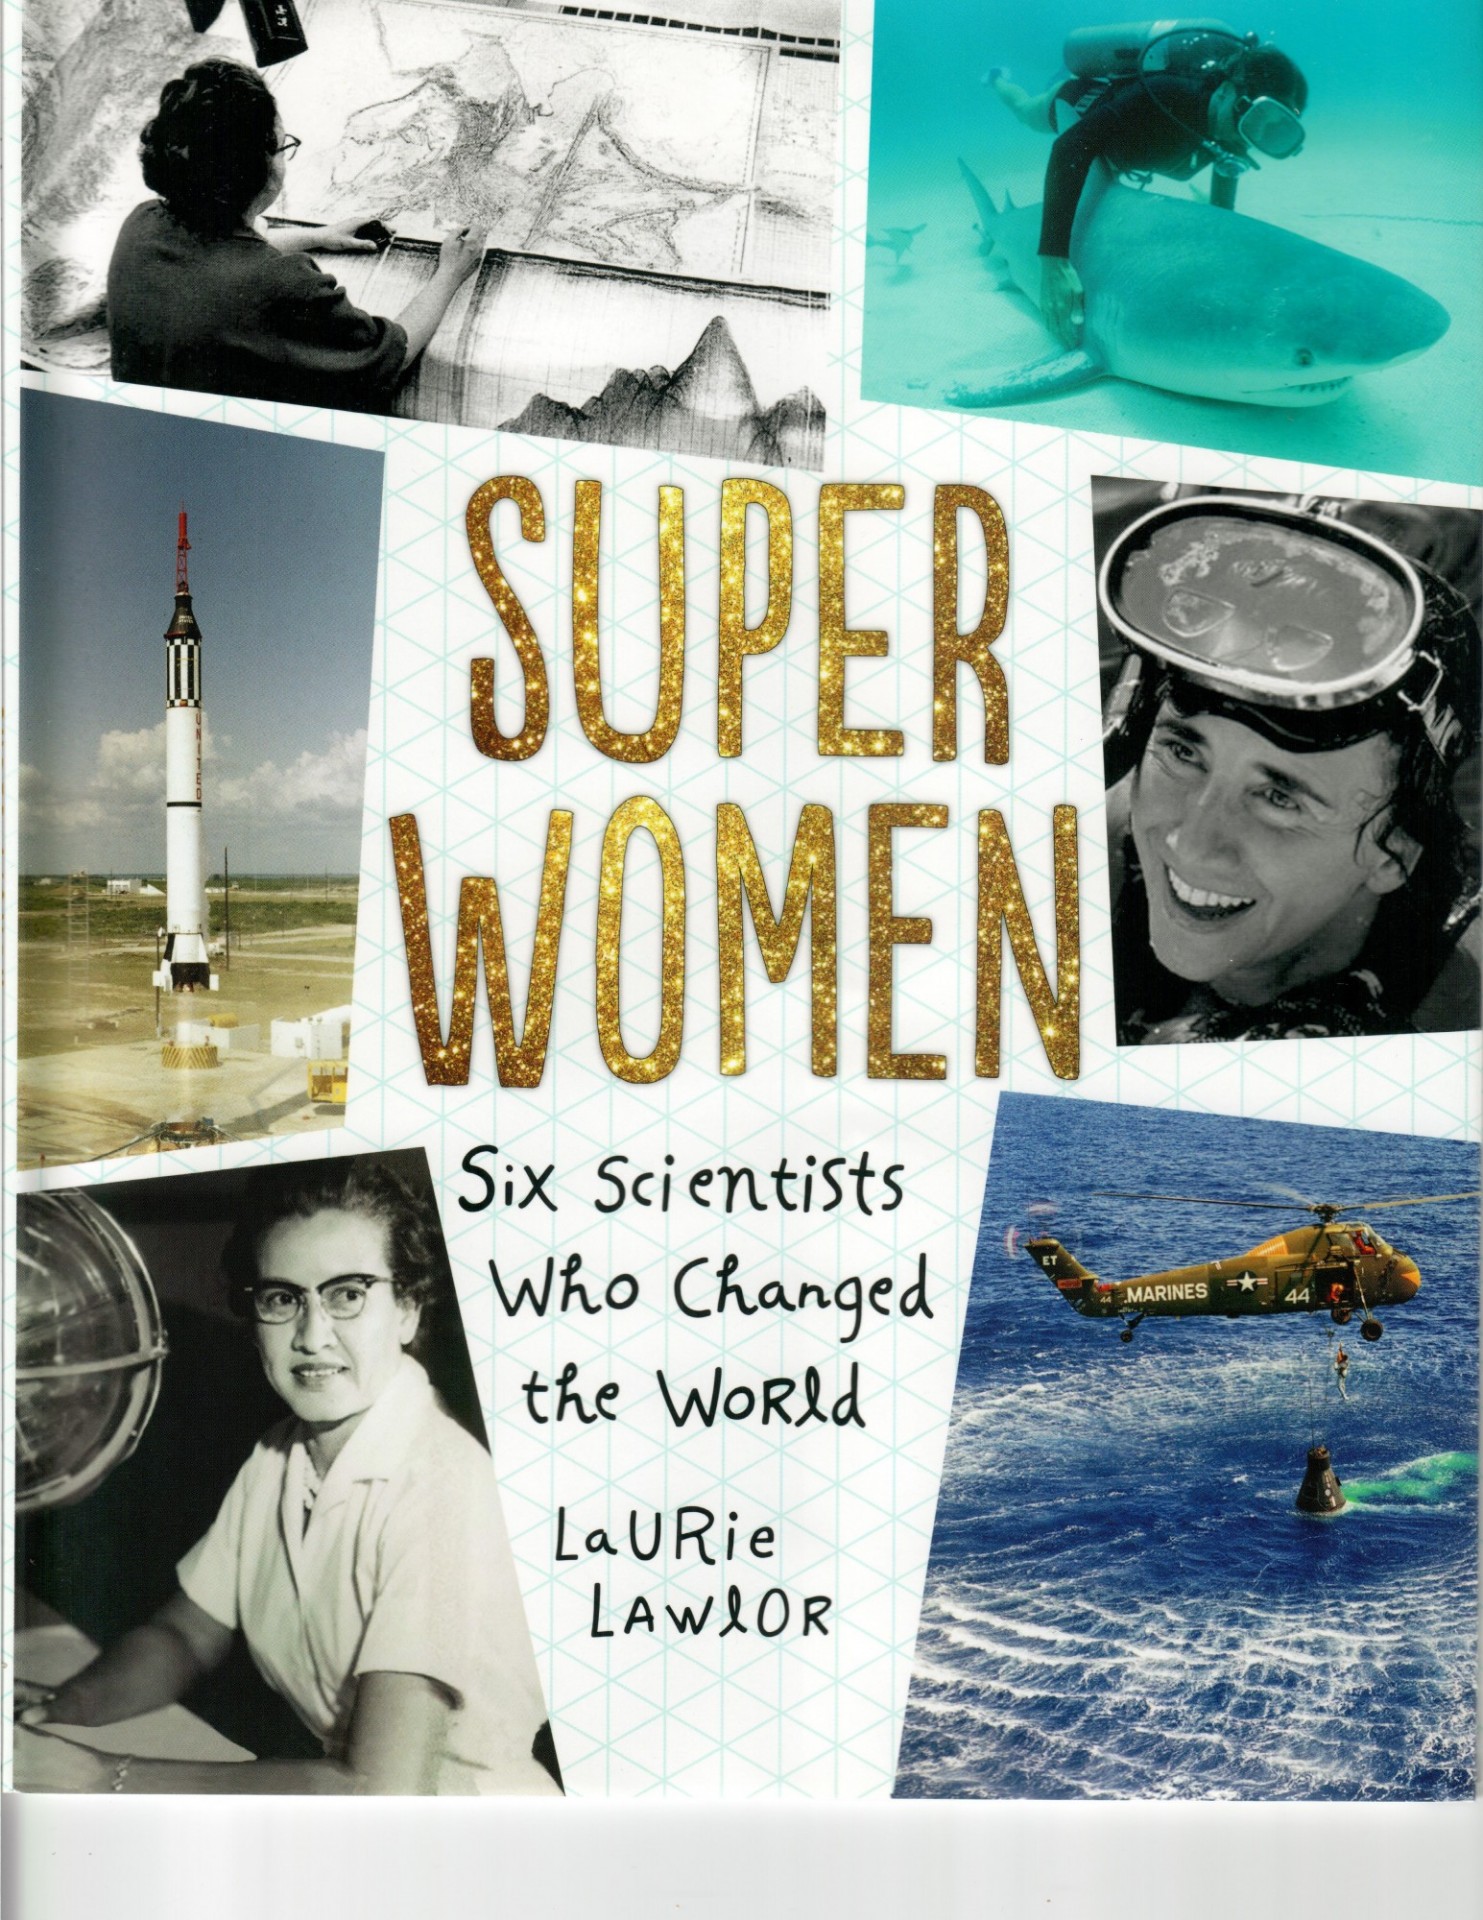 Super Women: Six Scientists Who Changed the World by Laurie Lawlor